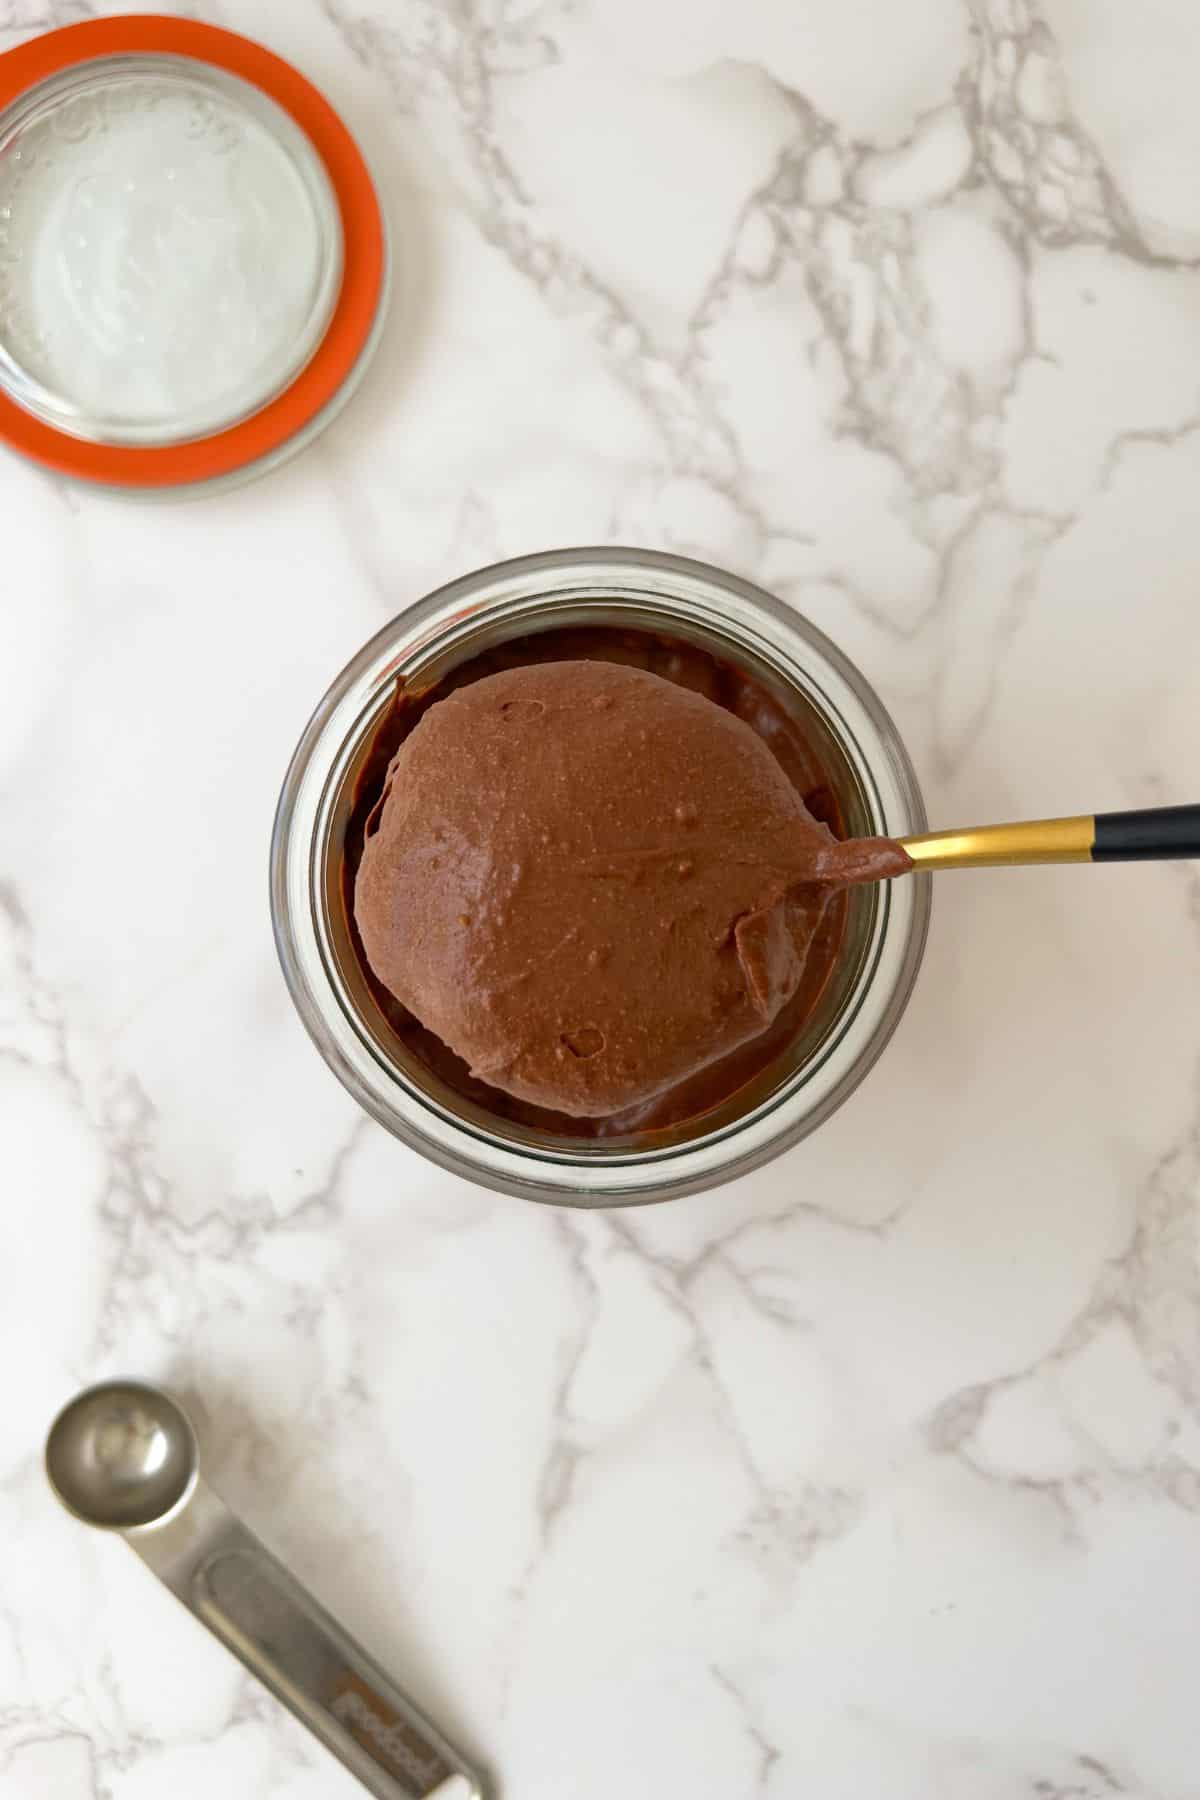 scoop of high protein chocolate mousse